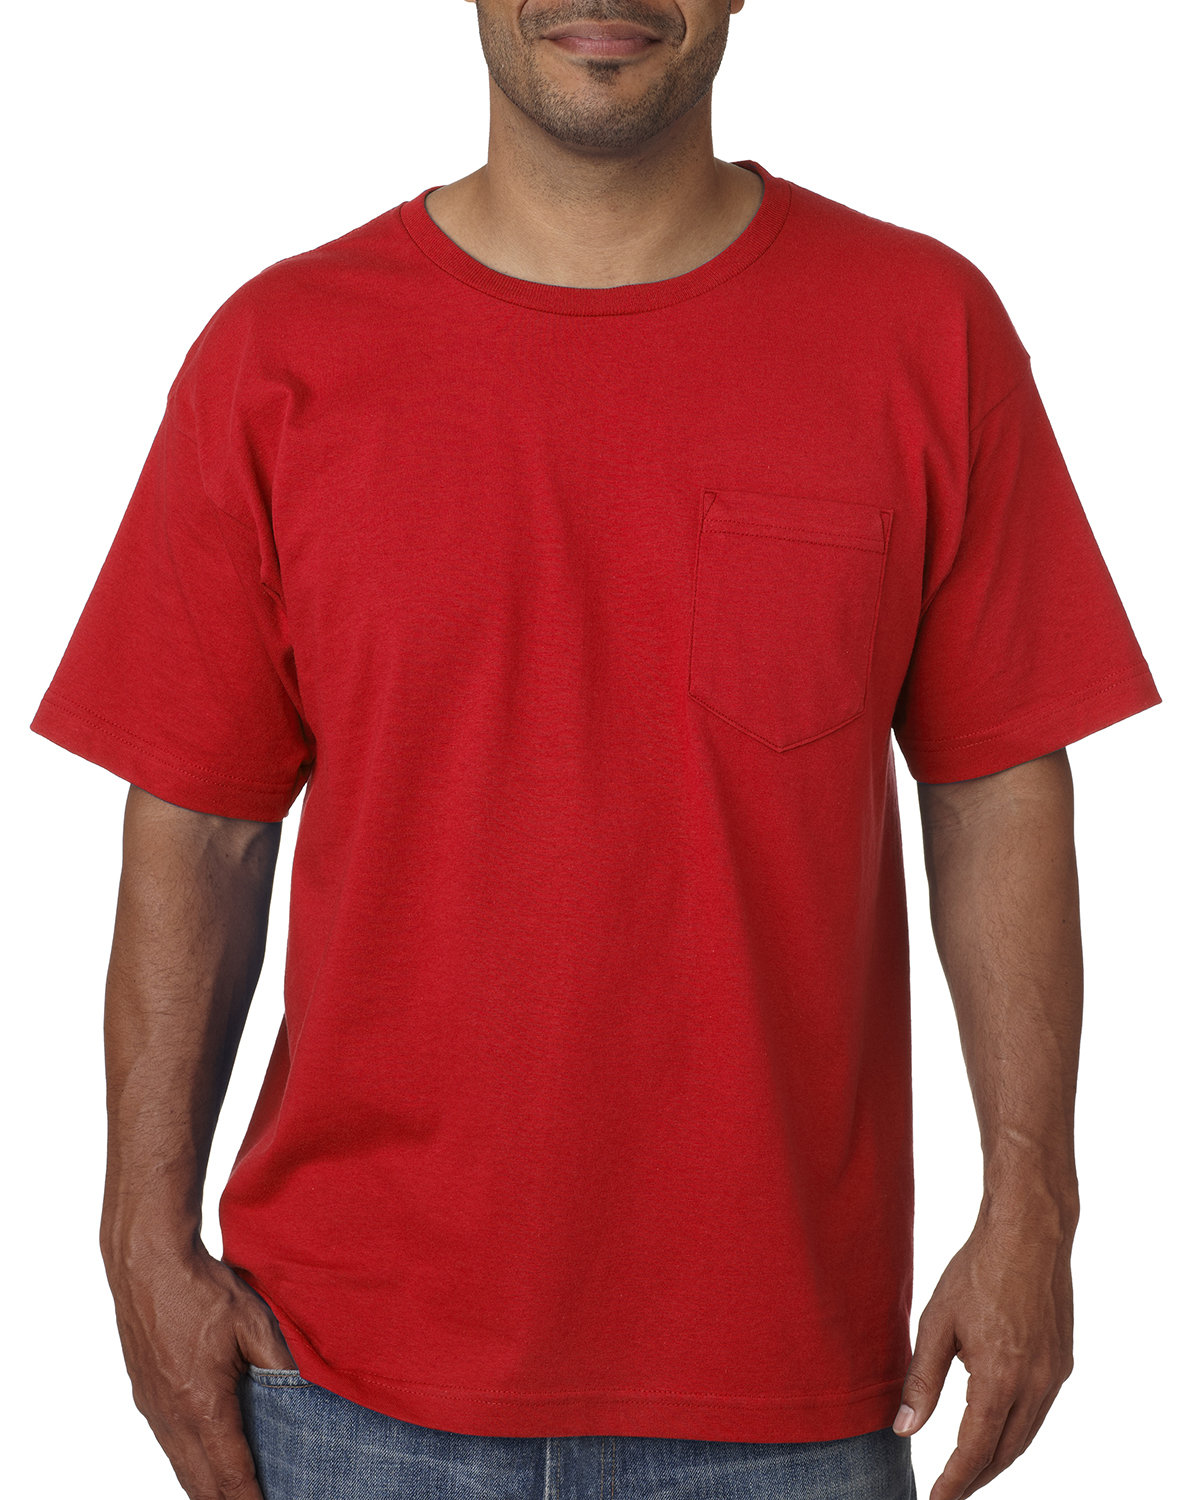 Bayside Adult Short-Sleeve T-Shirt with Pocket RED 